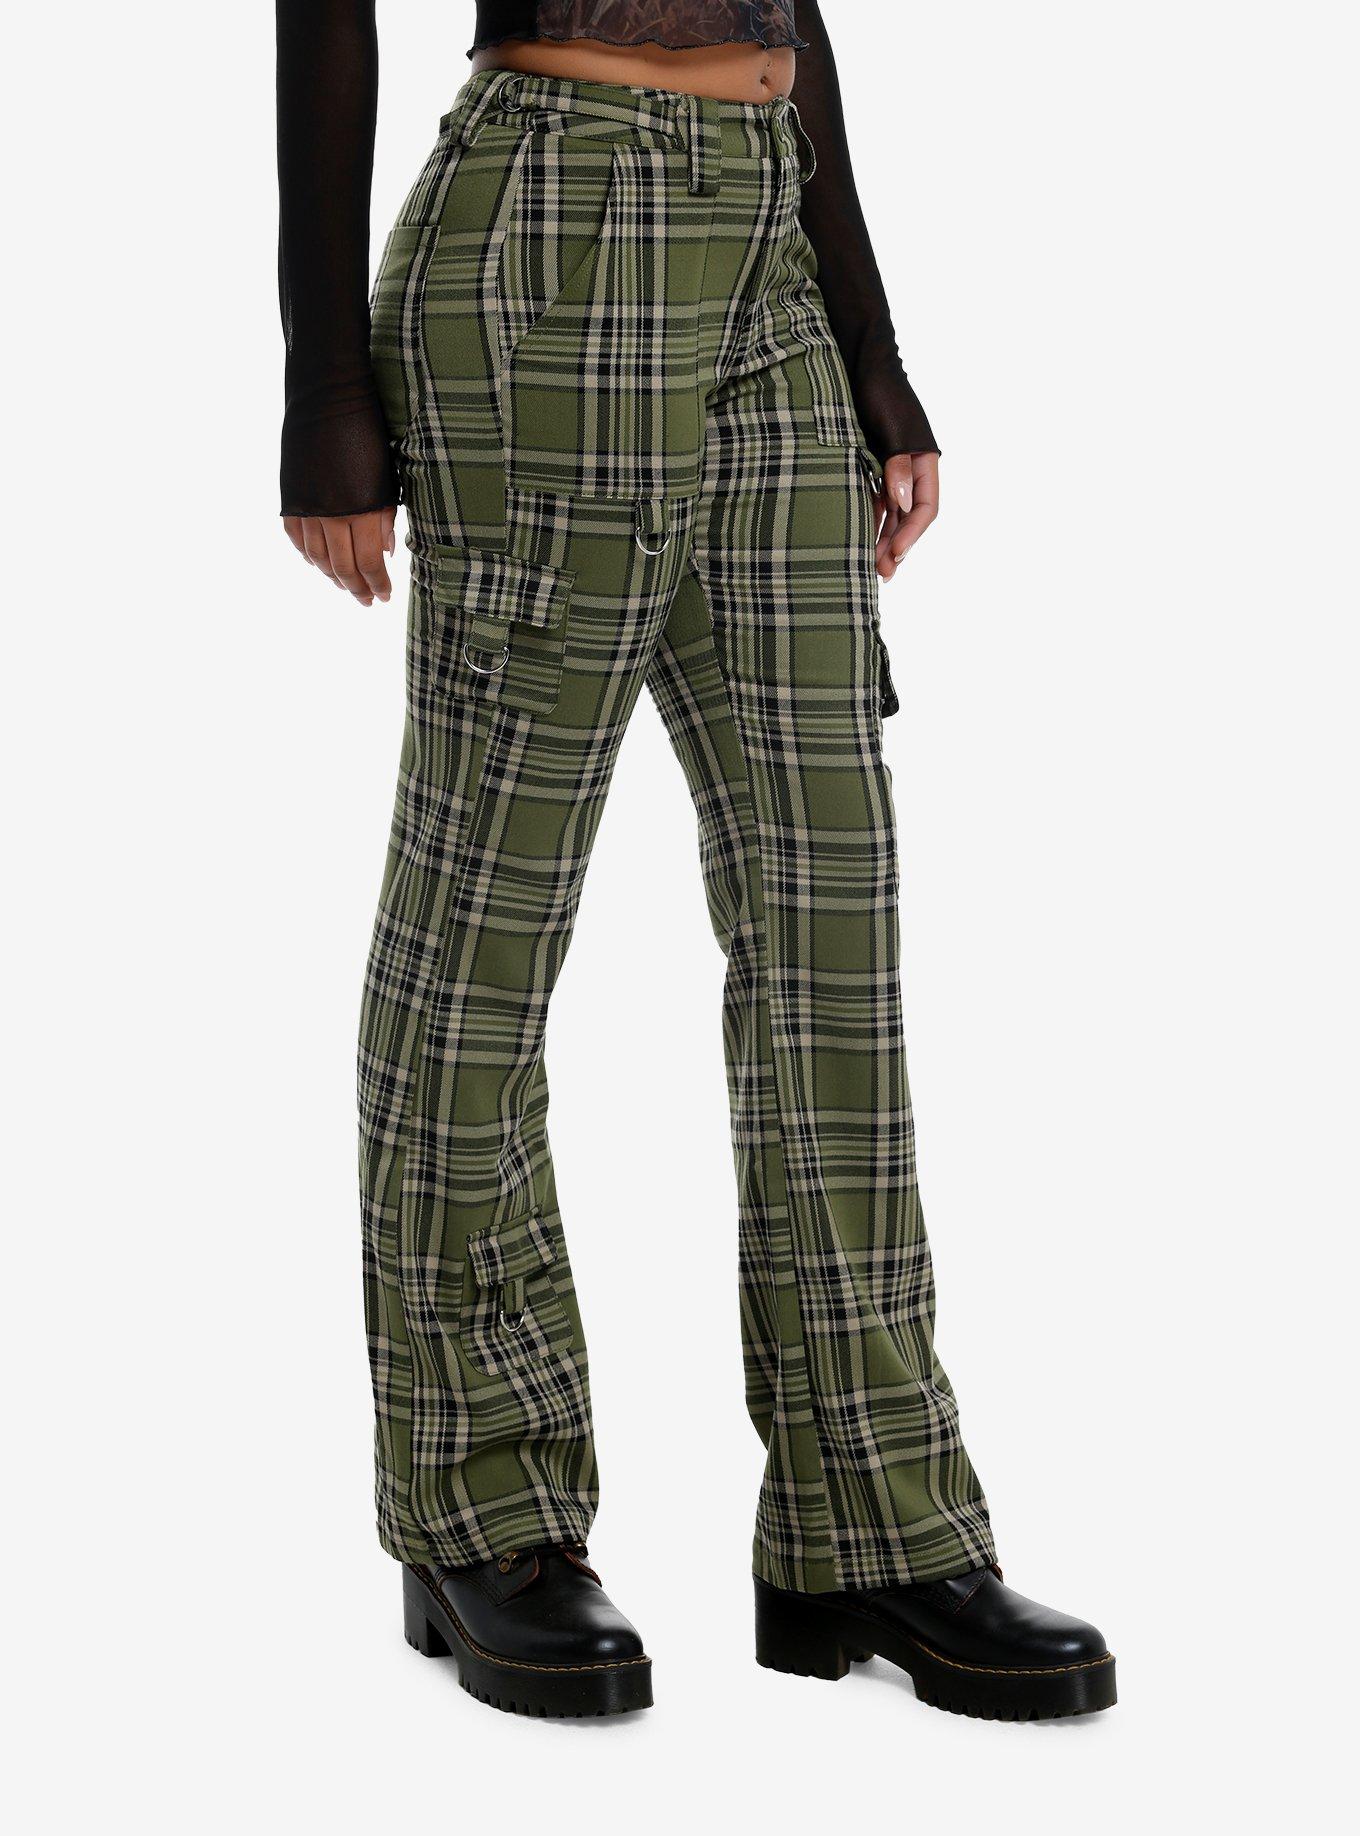 Thorn & Fable Green Plaid Hardware Girls Flare Pants, BROWN, alternate